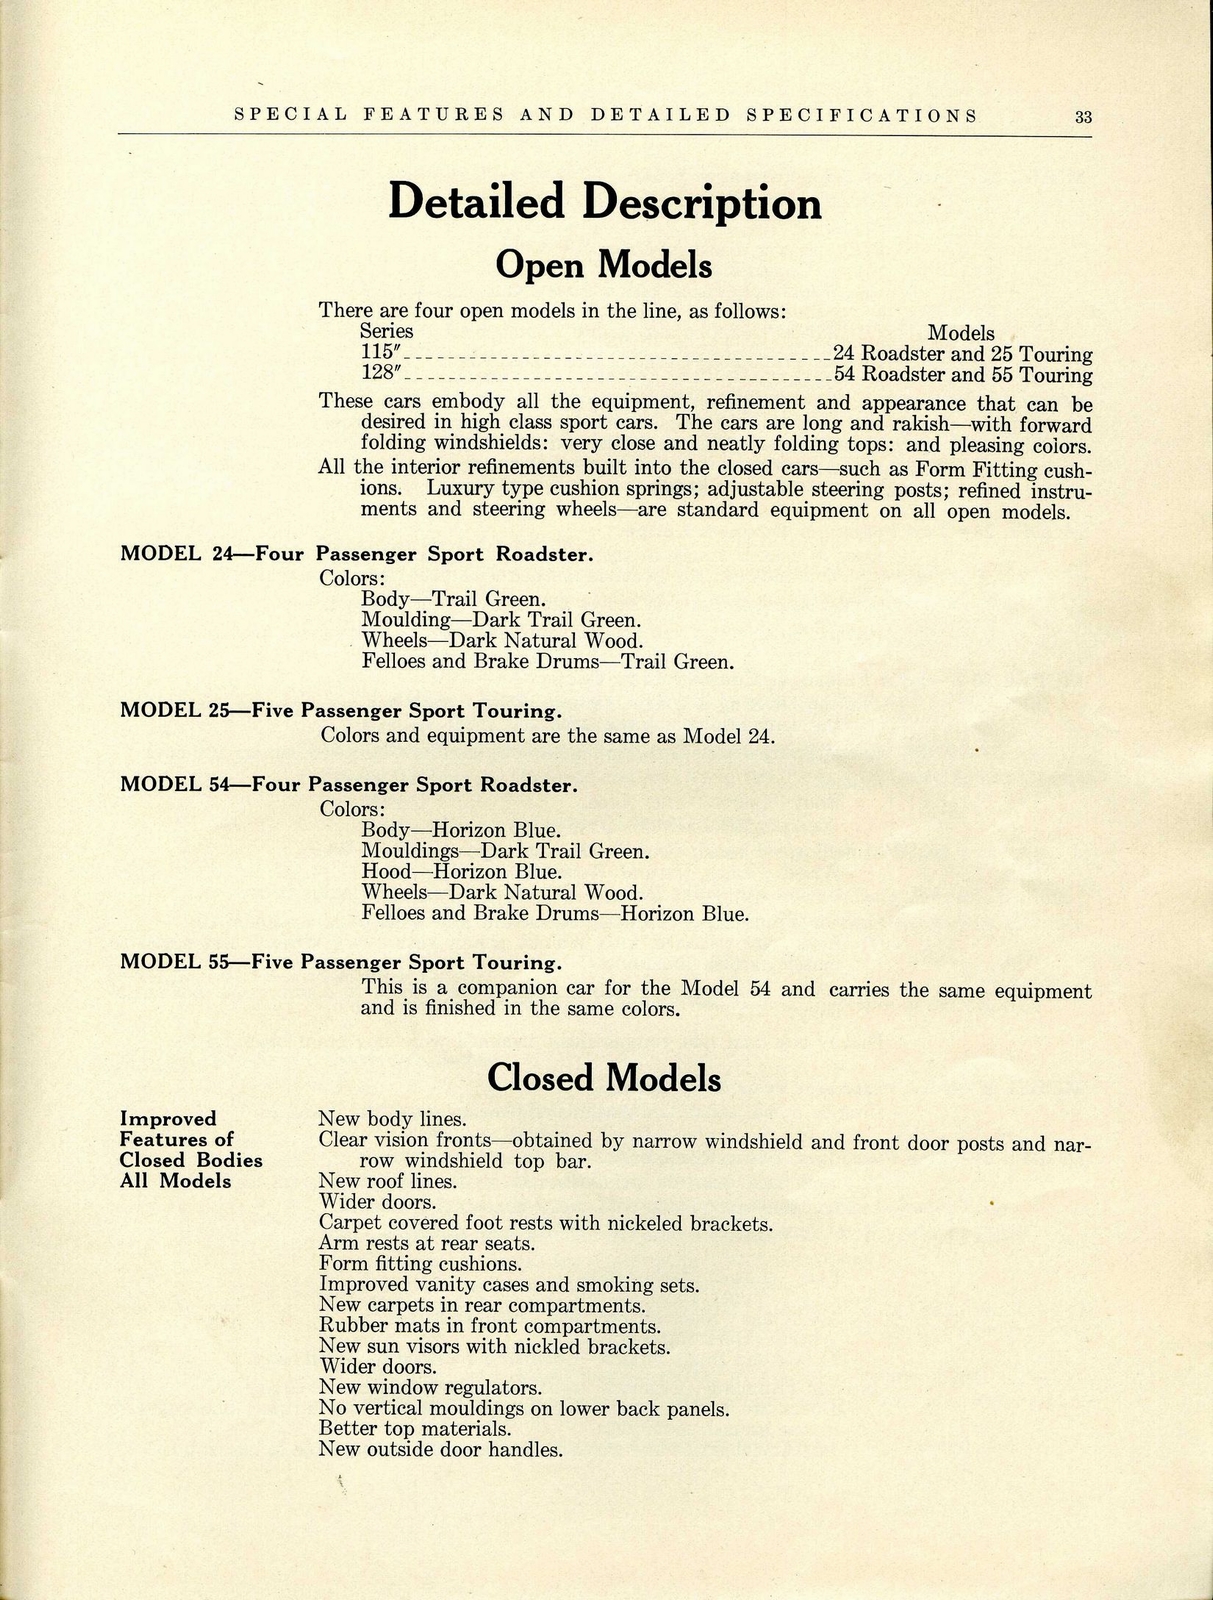 n_1928 Buick Special Features and  Specs-33.jpg